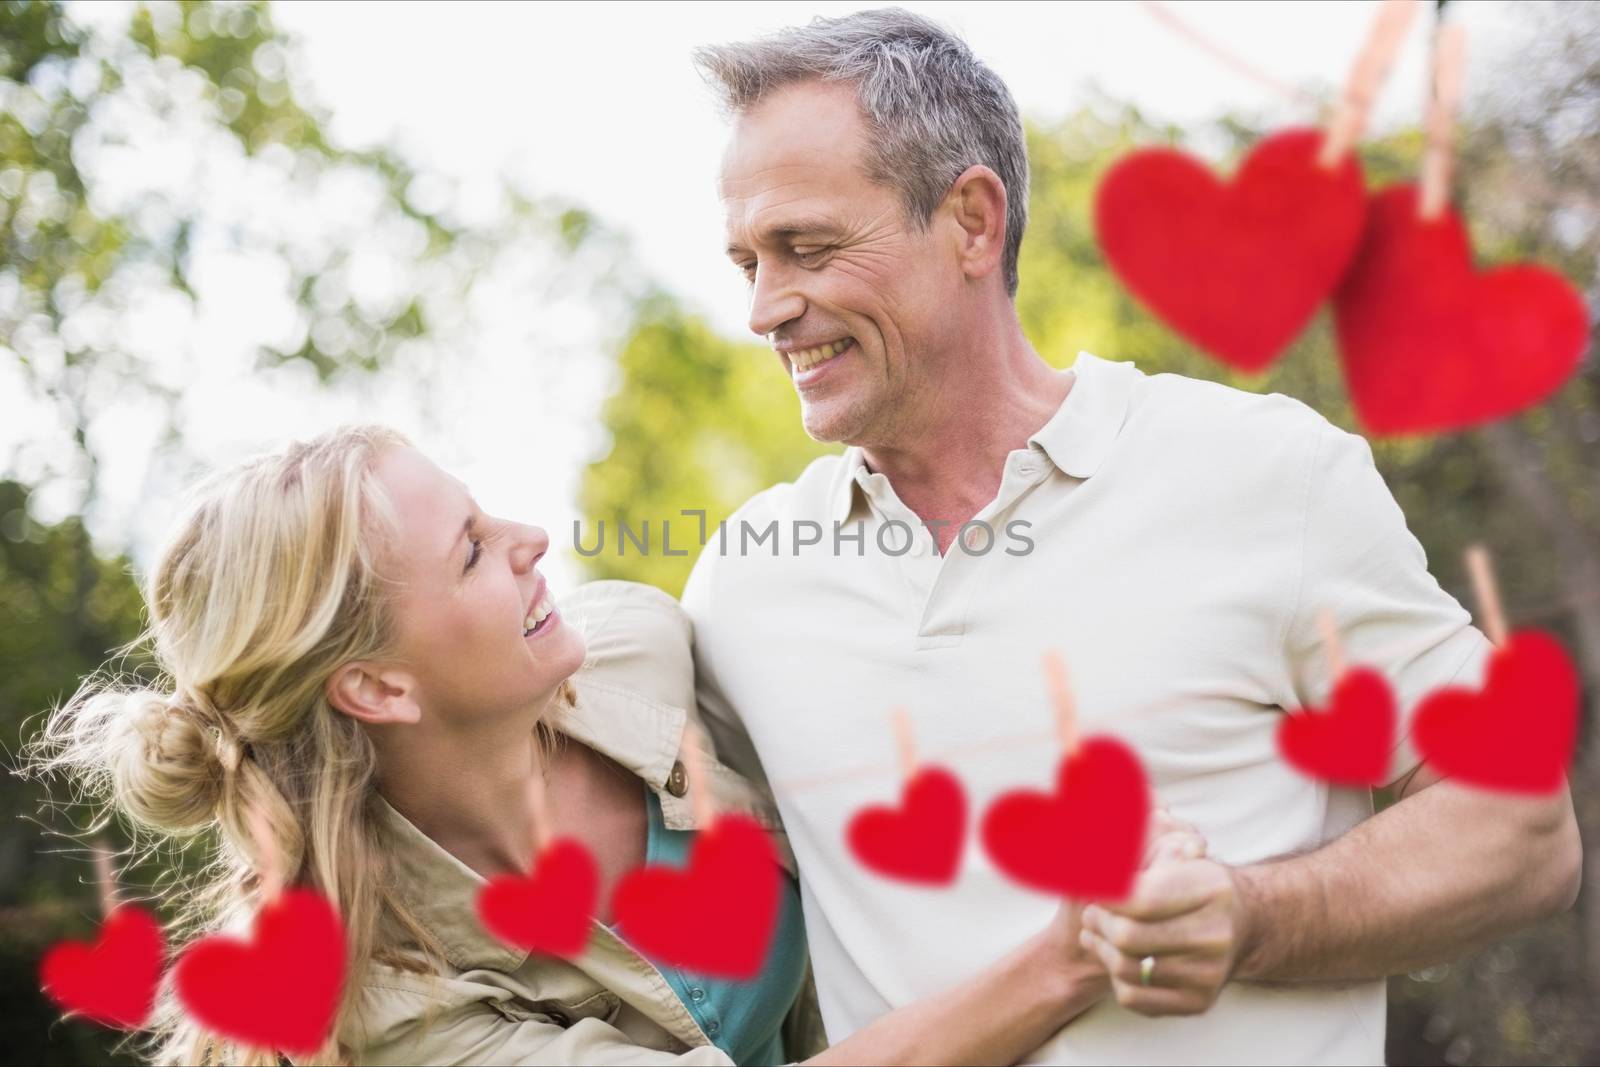 Couple having fun with red hanging hearts by Wavebreakmedia